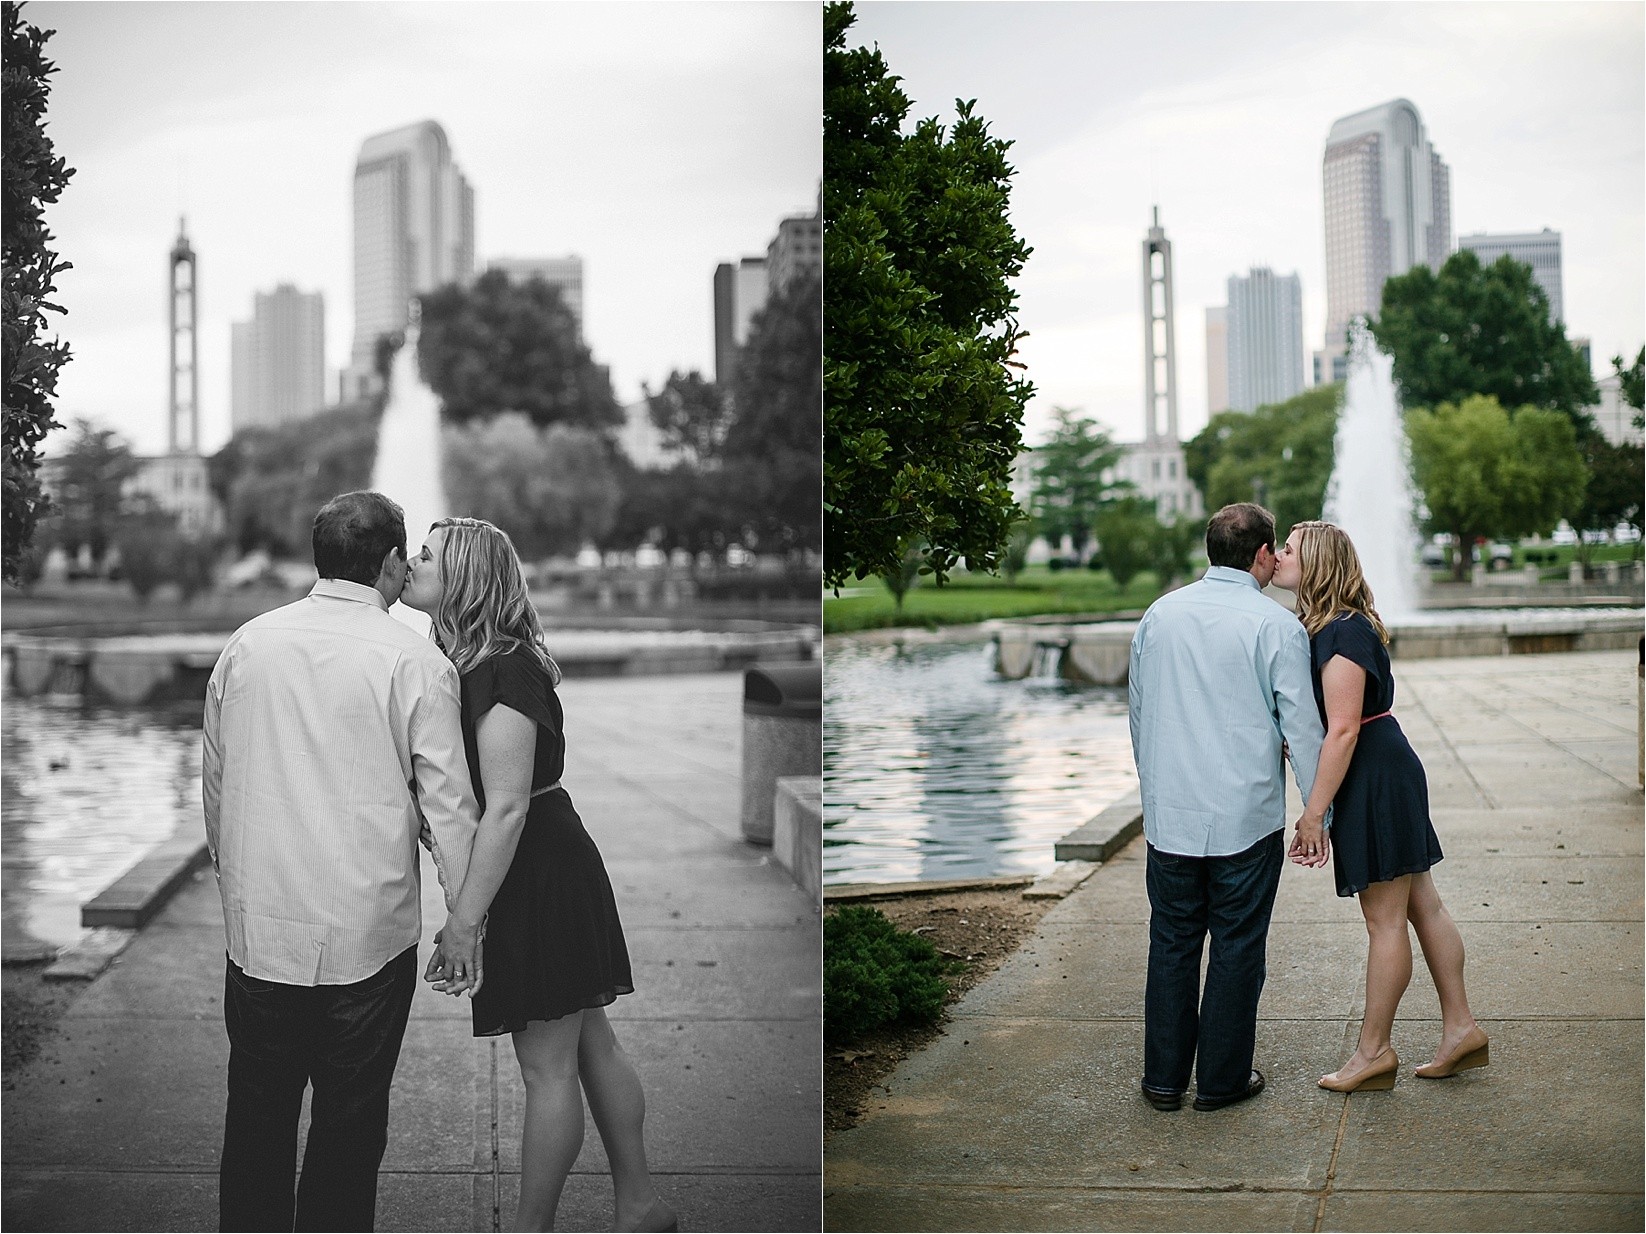 Charlotte Skyline at Catherine & Jordan's engagement session at freedom park and marshall park in Charlotte North Carolina